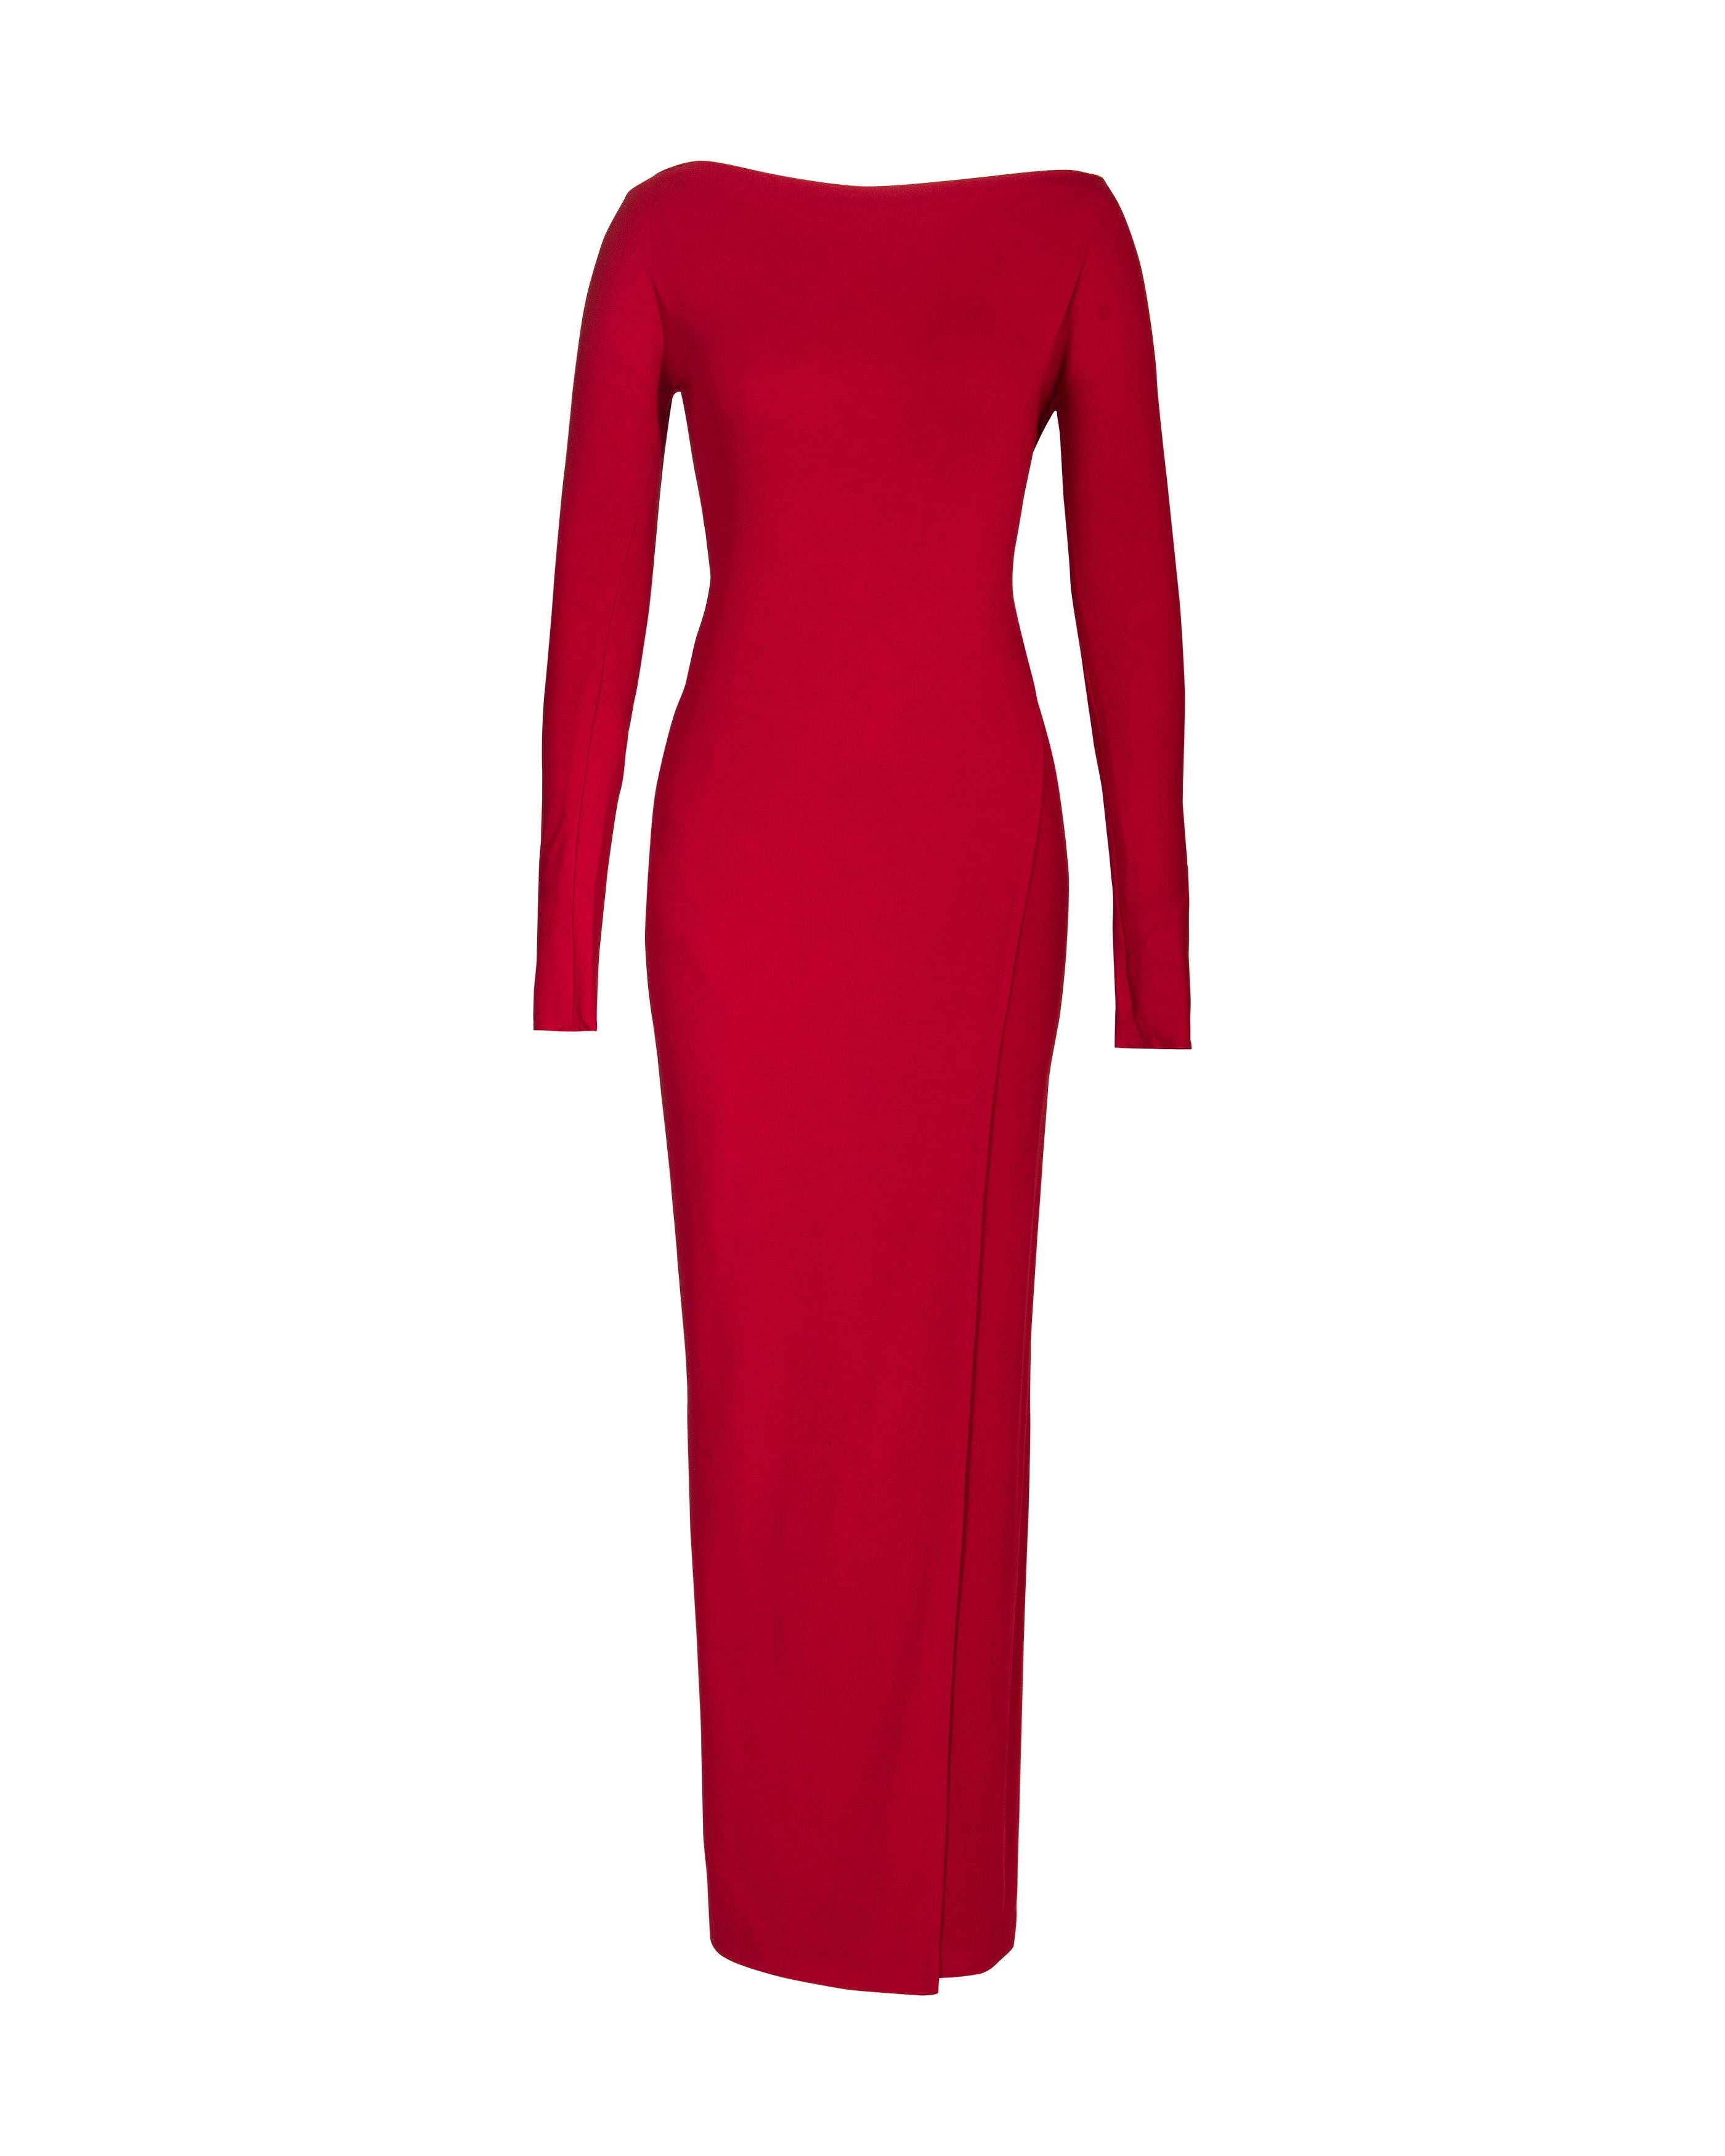 1990's Donna Karan red long sleeve jersey asymmetrical gown. Long sleeve gown with bateau neckline and asymmetrical-style high slit wrap dress interior at right side. Built-in elasticized waistband. Can be styled with wrap to front or back depending